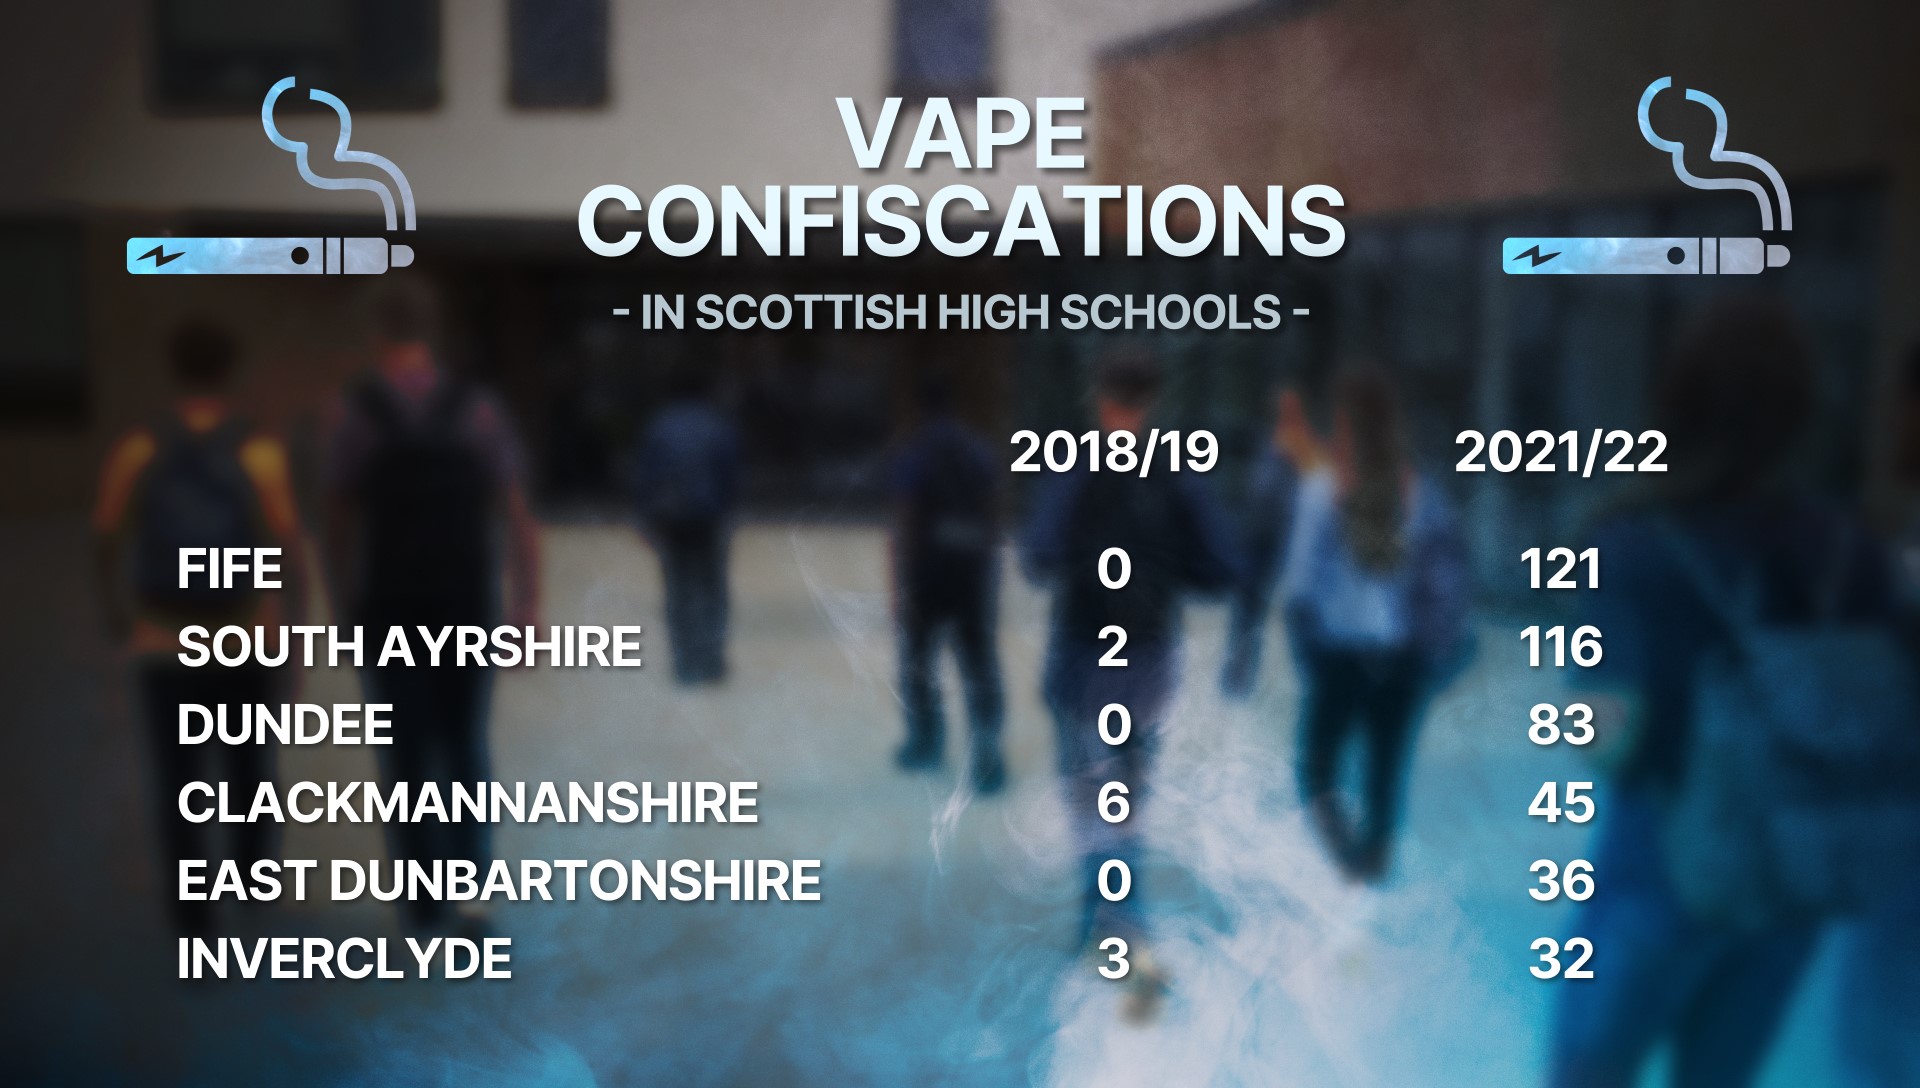 The number of confiscations is rising in Scotland.